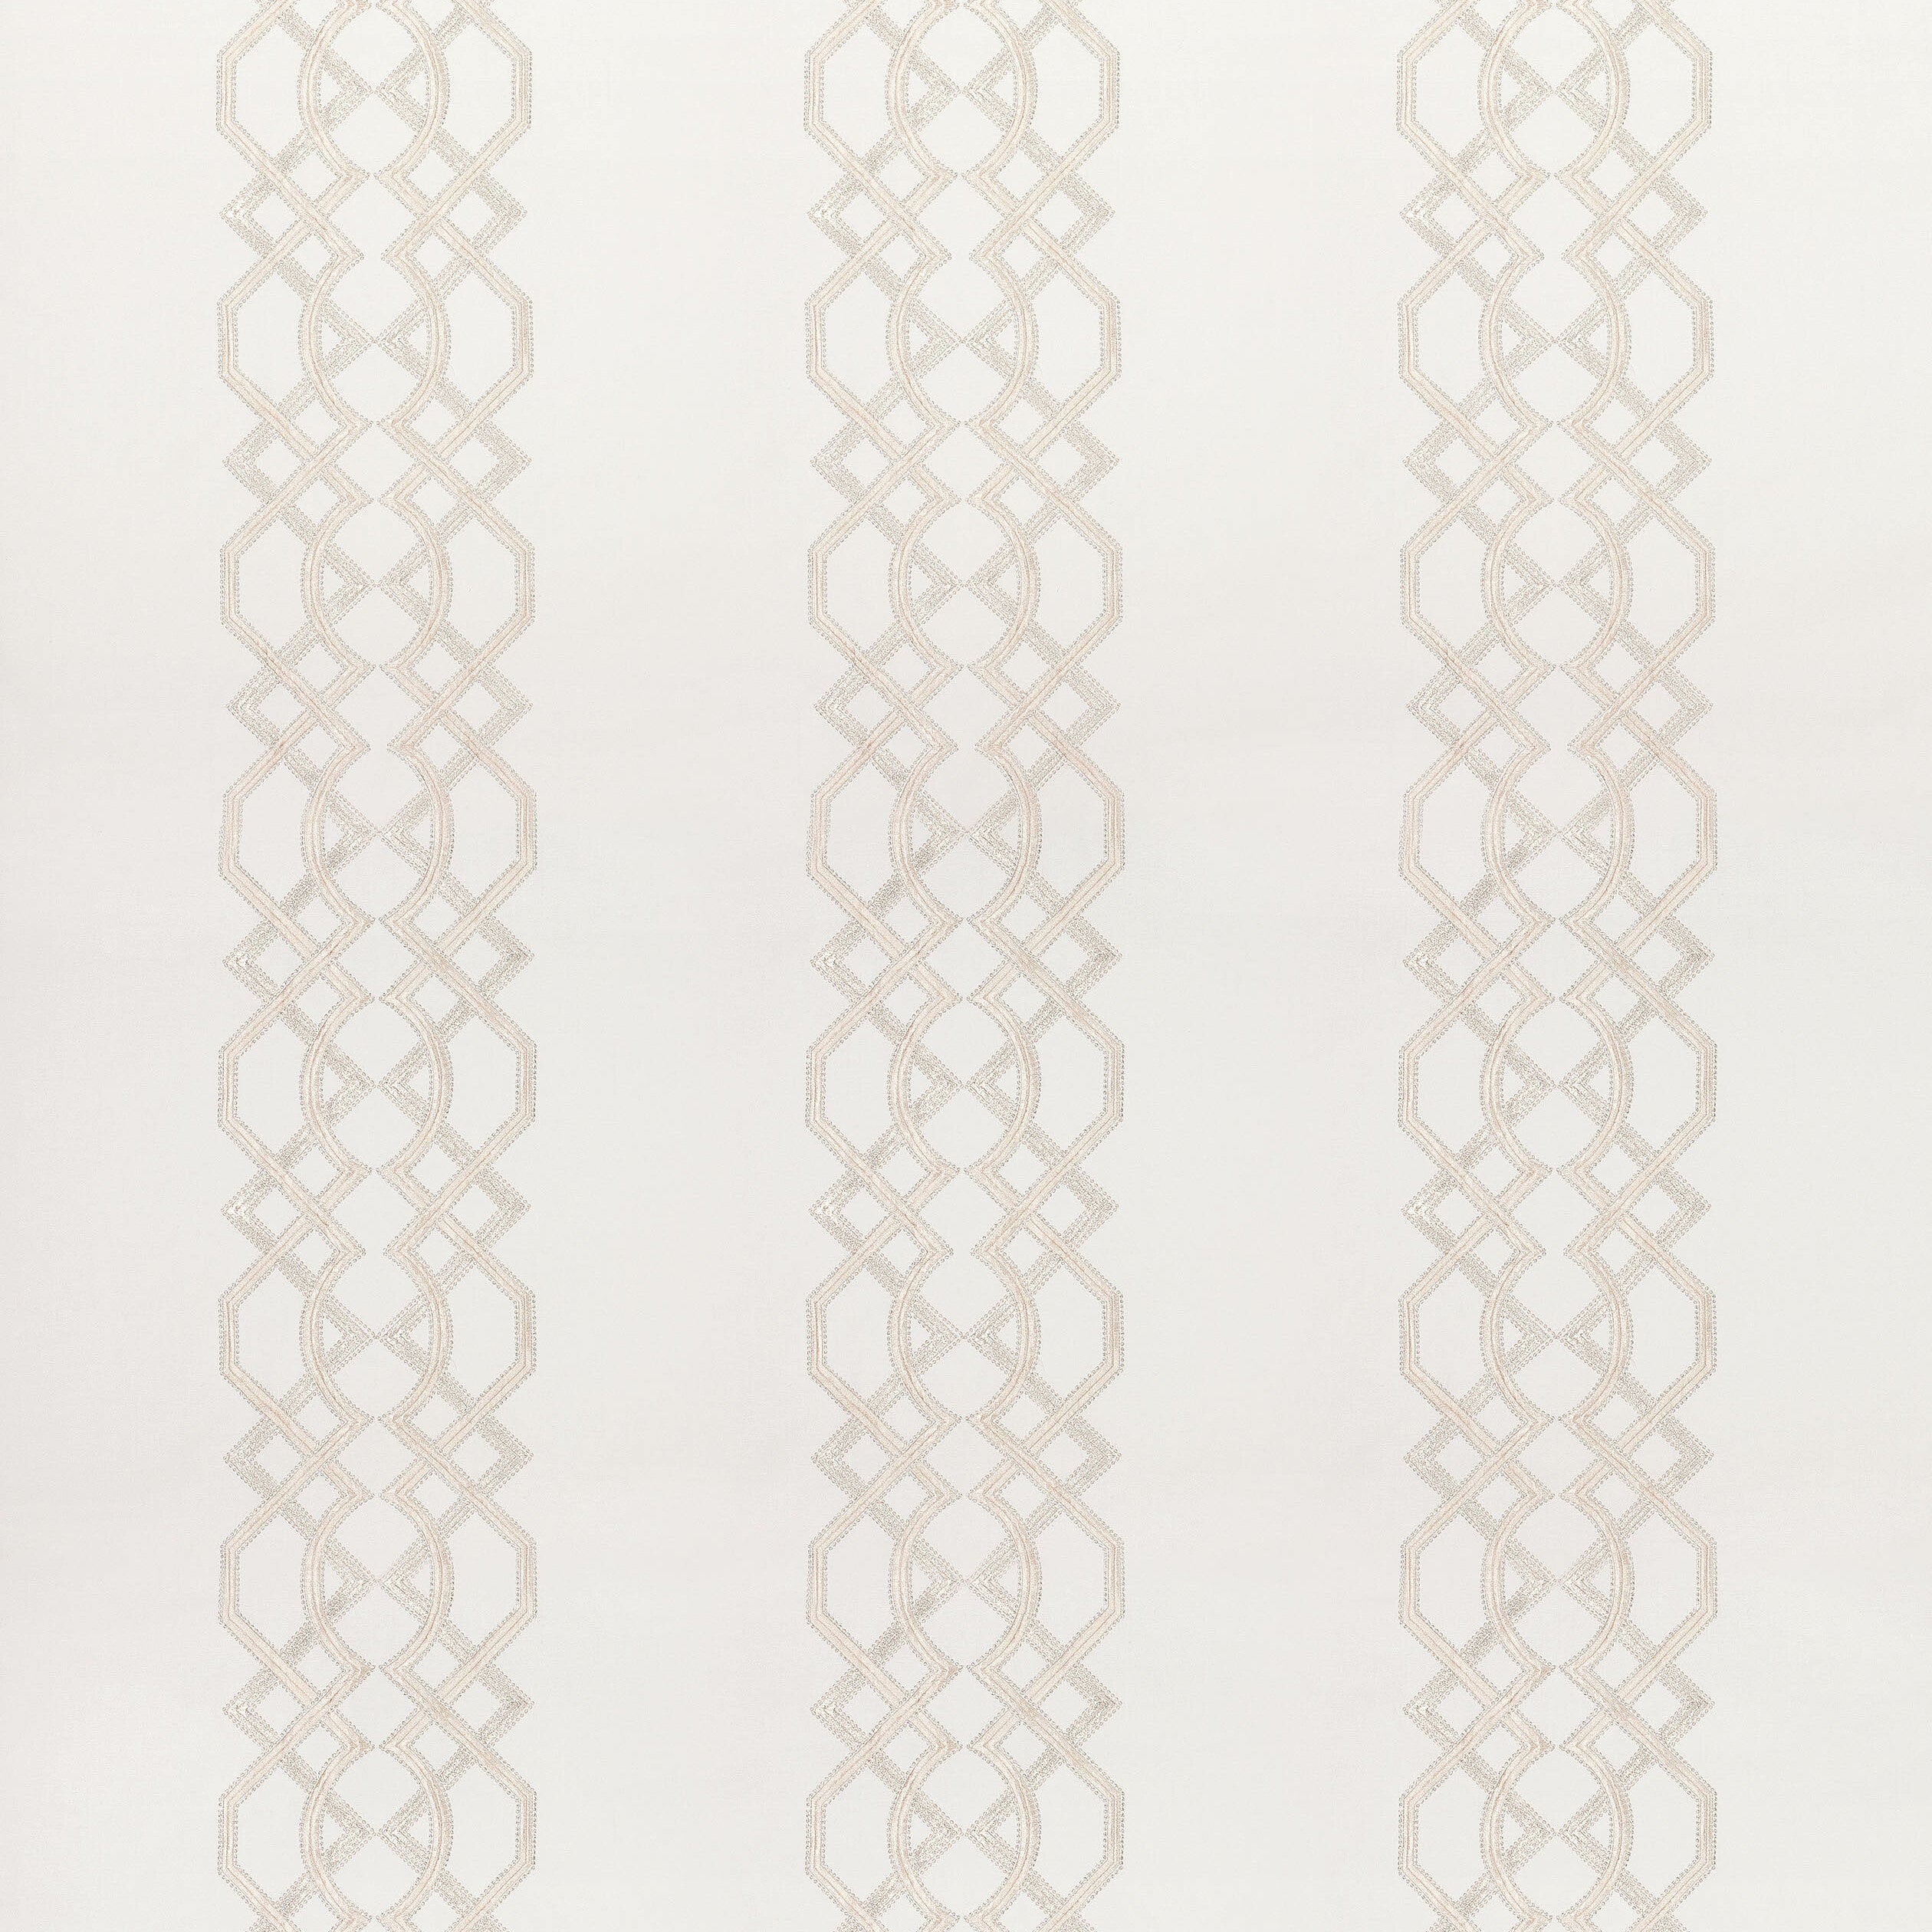 Bergman Embroidery fabric in off white color - pattern number AW9127 - by Anna French in the Natural Glimmer collection